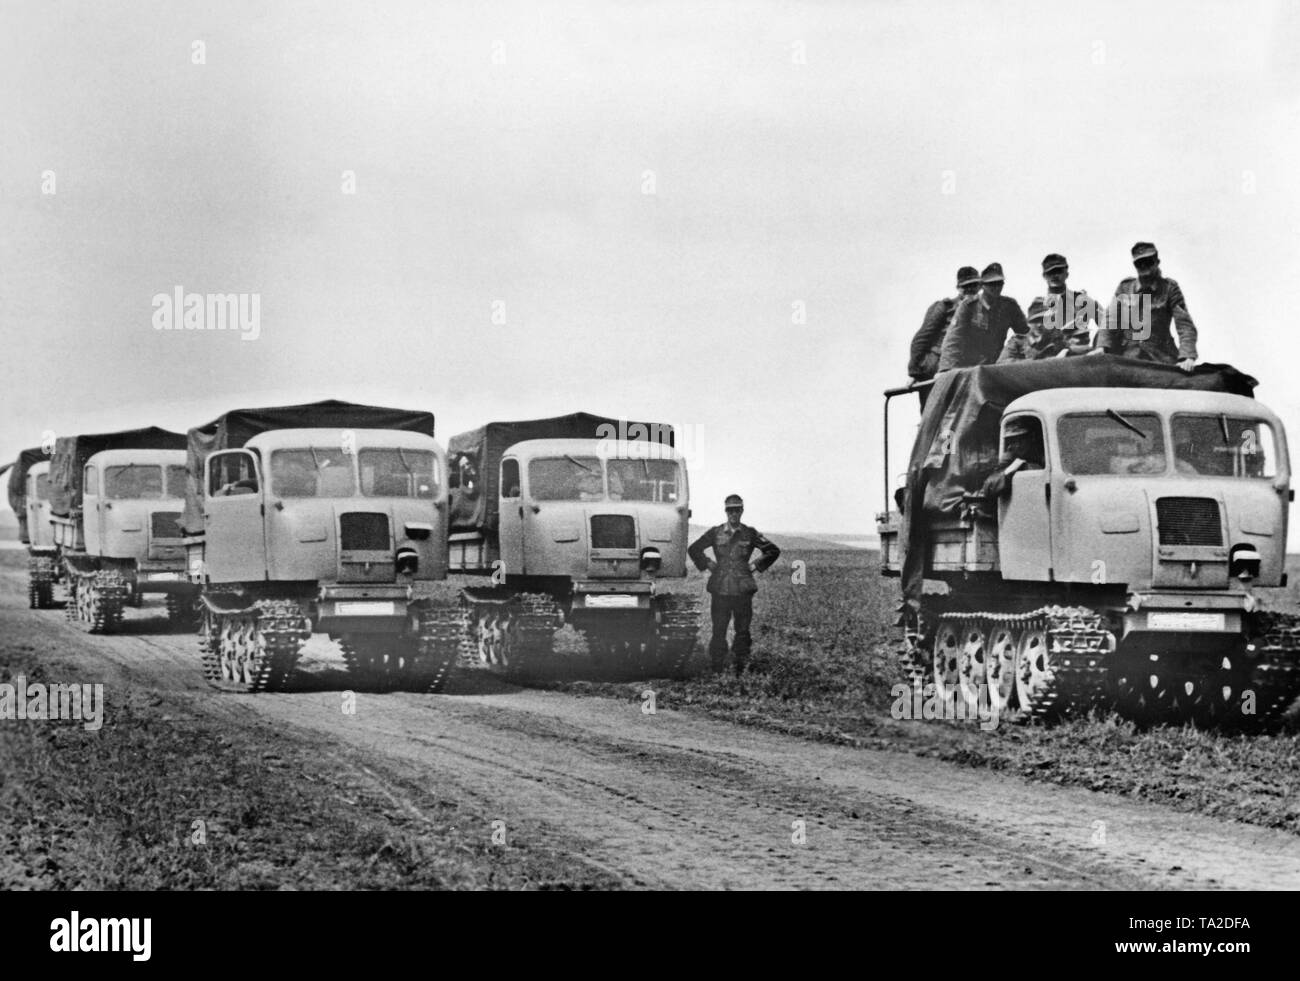 Five 'Raupenschlepper Ost' during the Second World War on the Eastern front. The Raupenschlepper Ost (Caterpillar Tractor East) was specially designed for the difficult ground conditions in the Soviet Union. Stock Photo